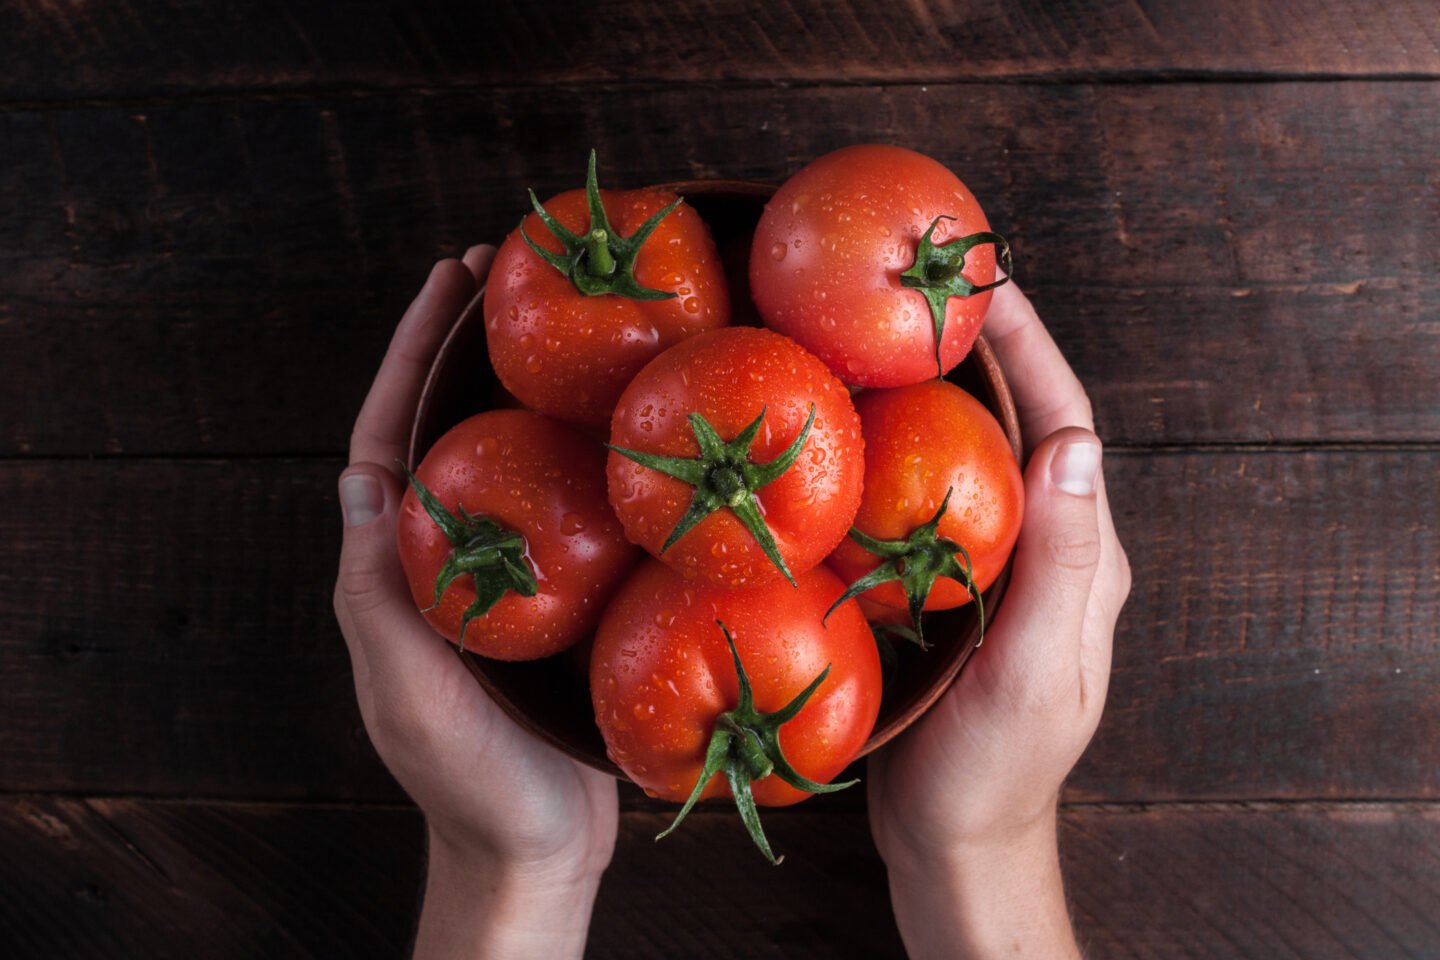 Fresh,Tomatoes,In,Hands,On,A,Wooden,Background.,Harvesting,Tomatoes.